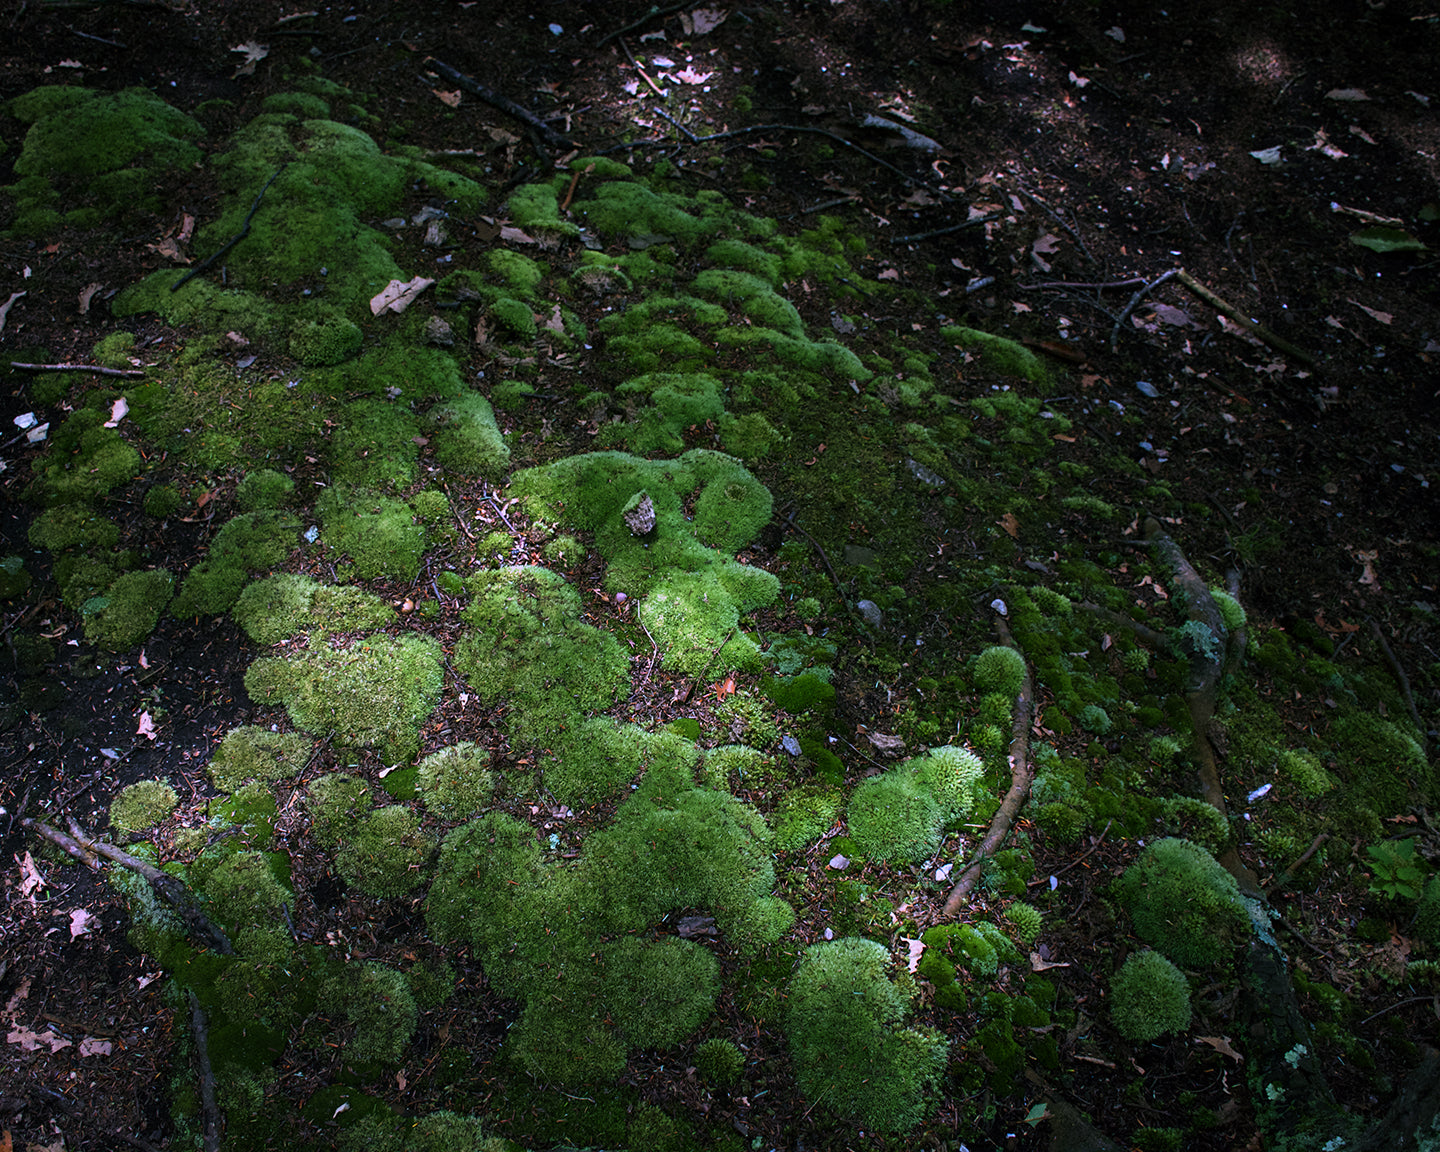 Moss, 2018, photography, 20 x 30 in. / 50.8 x 76.2 cm.